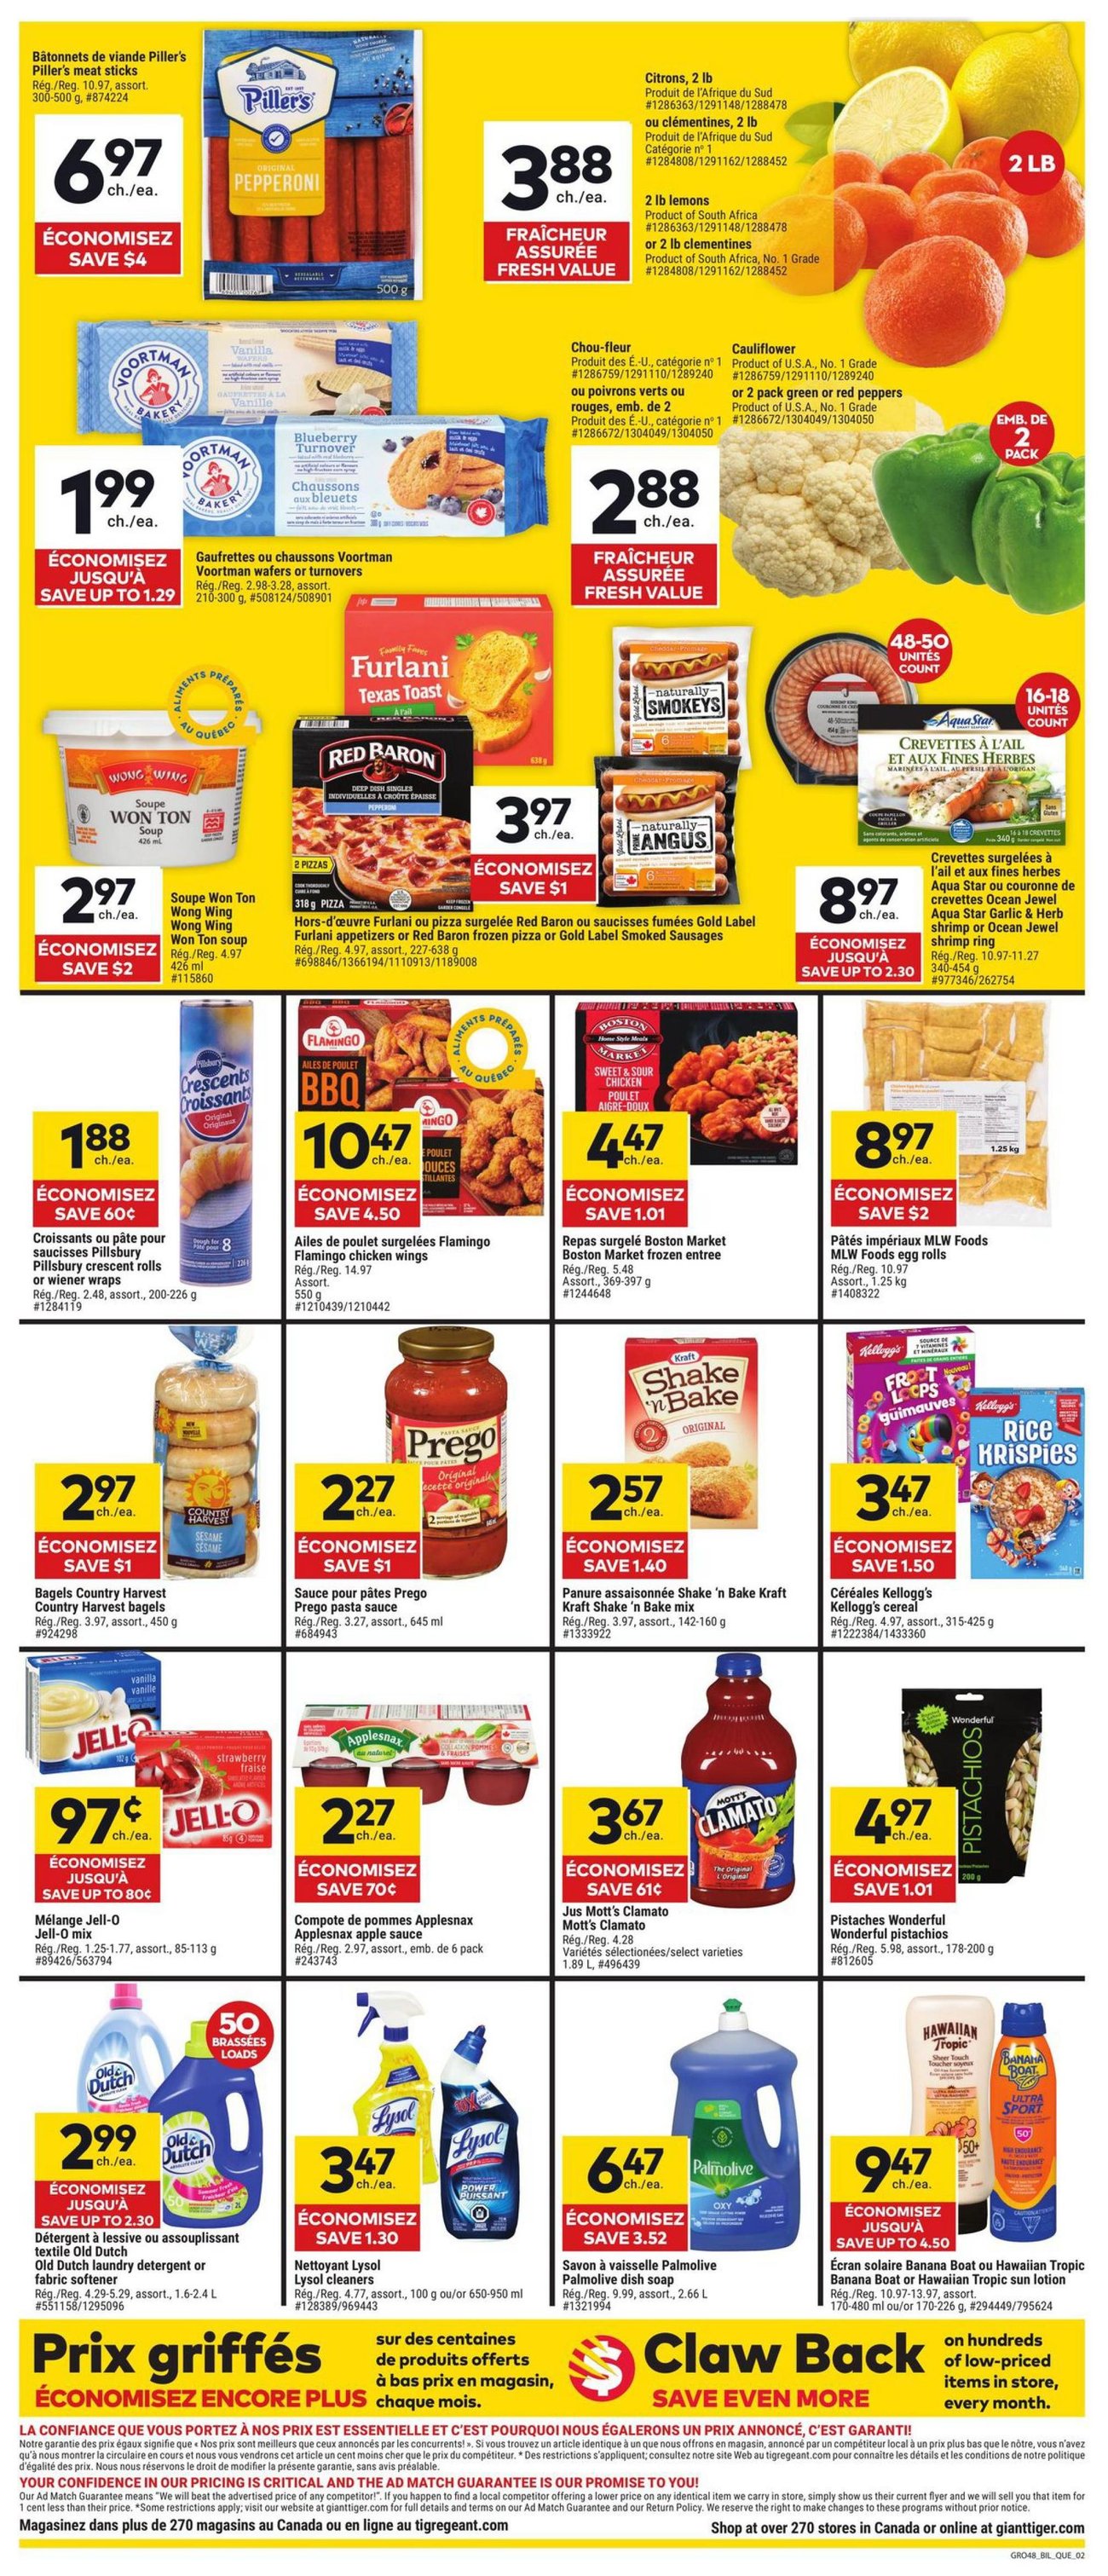 Giant Tiger - Quebec - Weekly Flyer Specials - Page 2